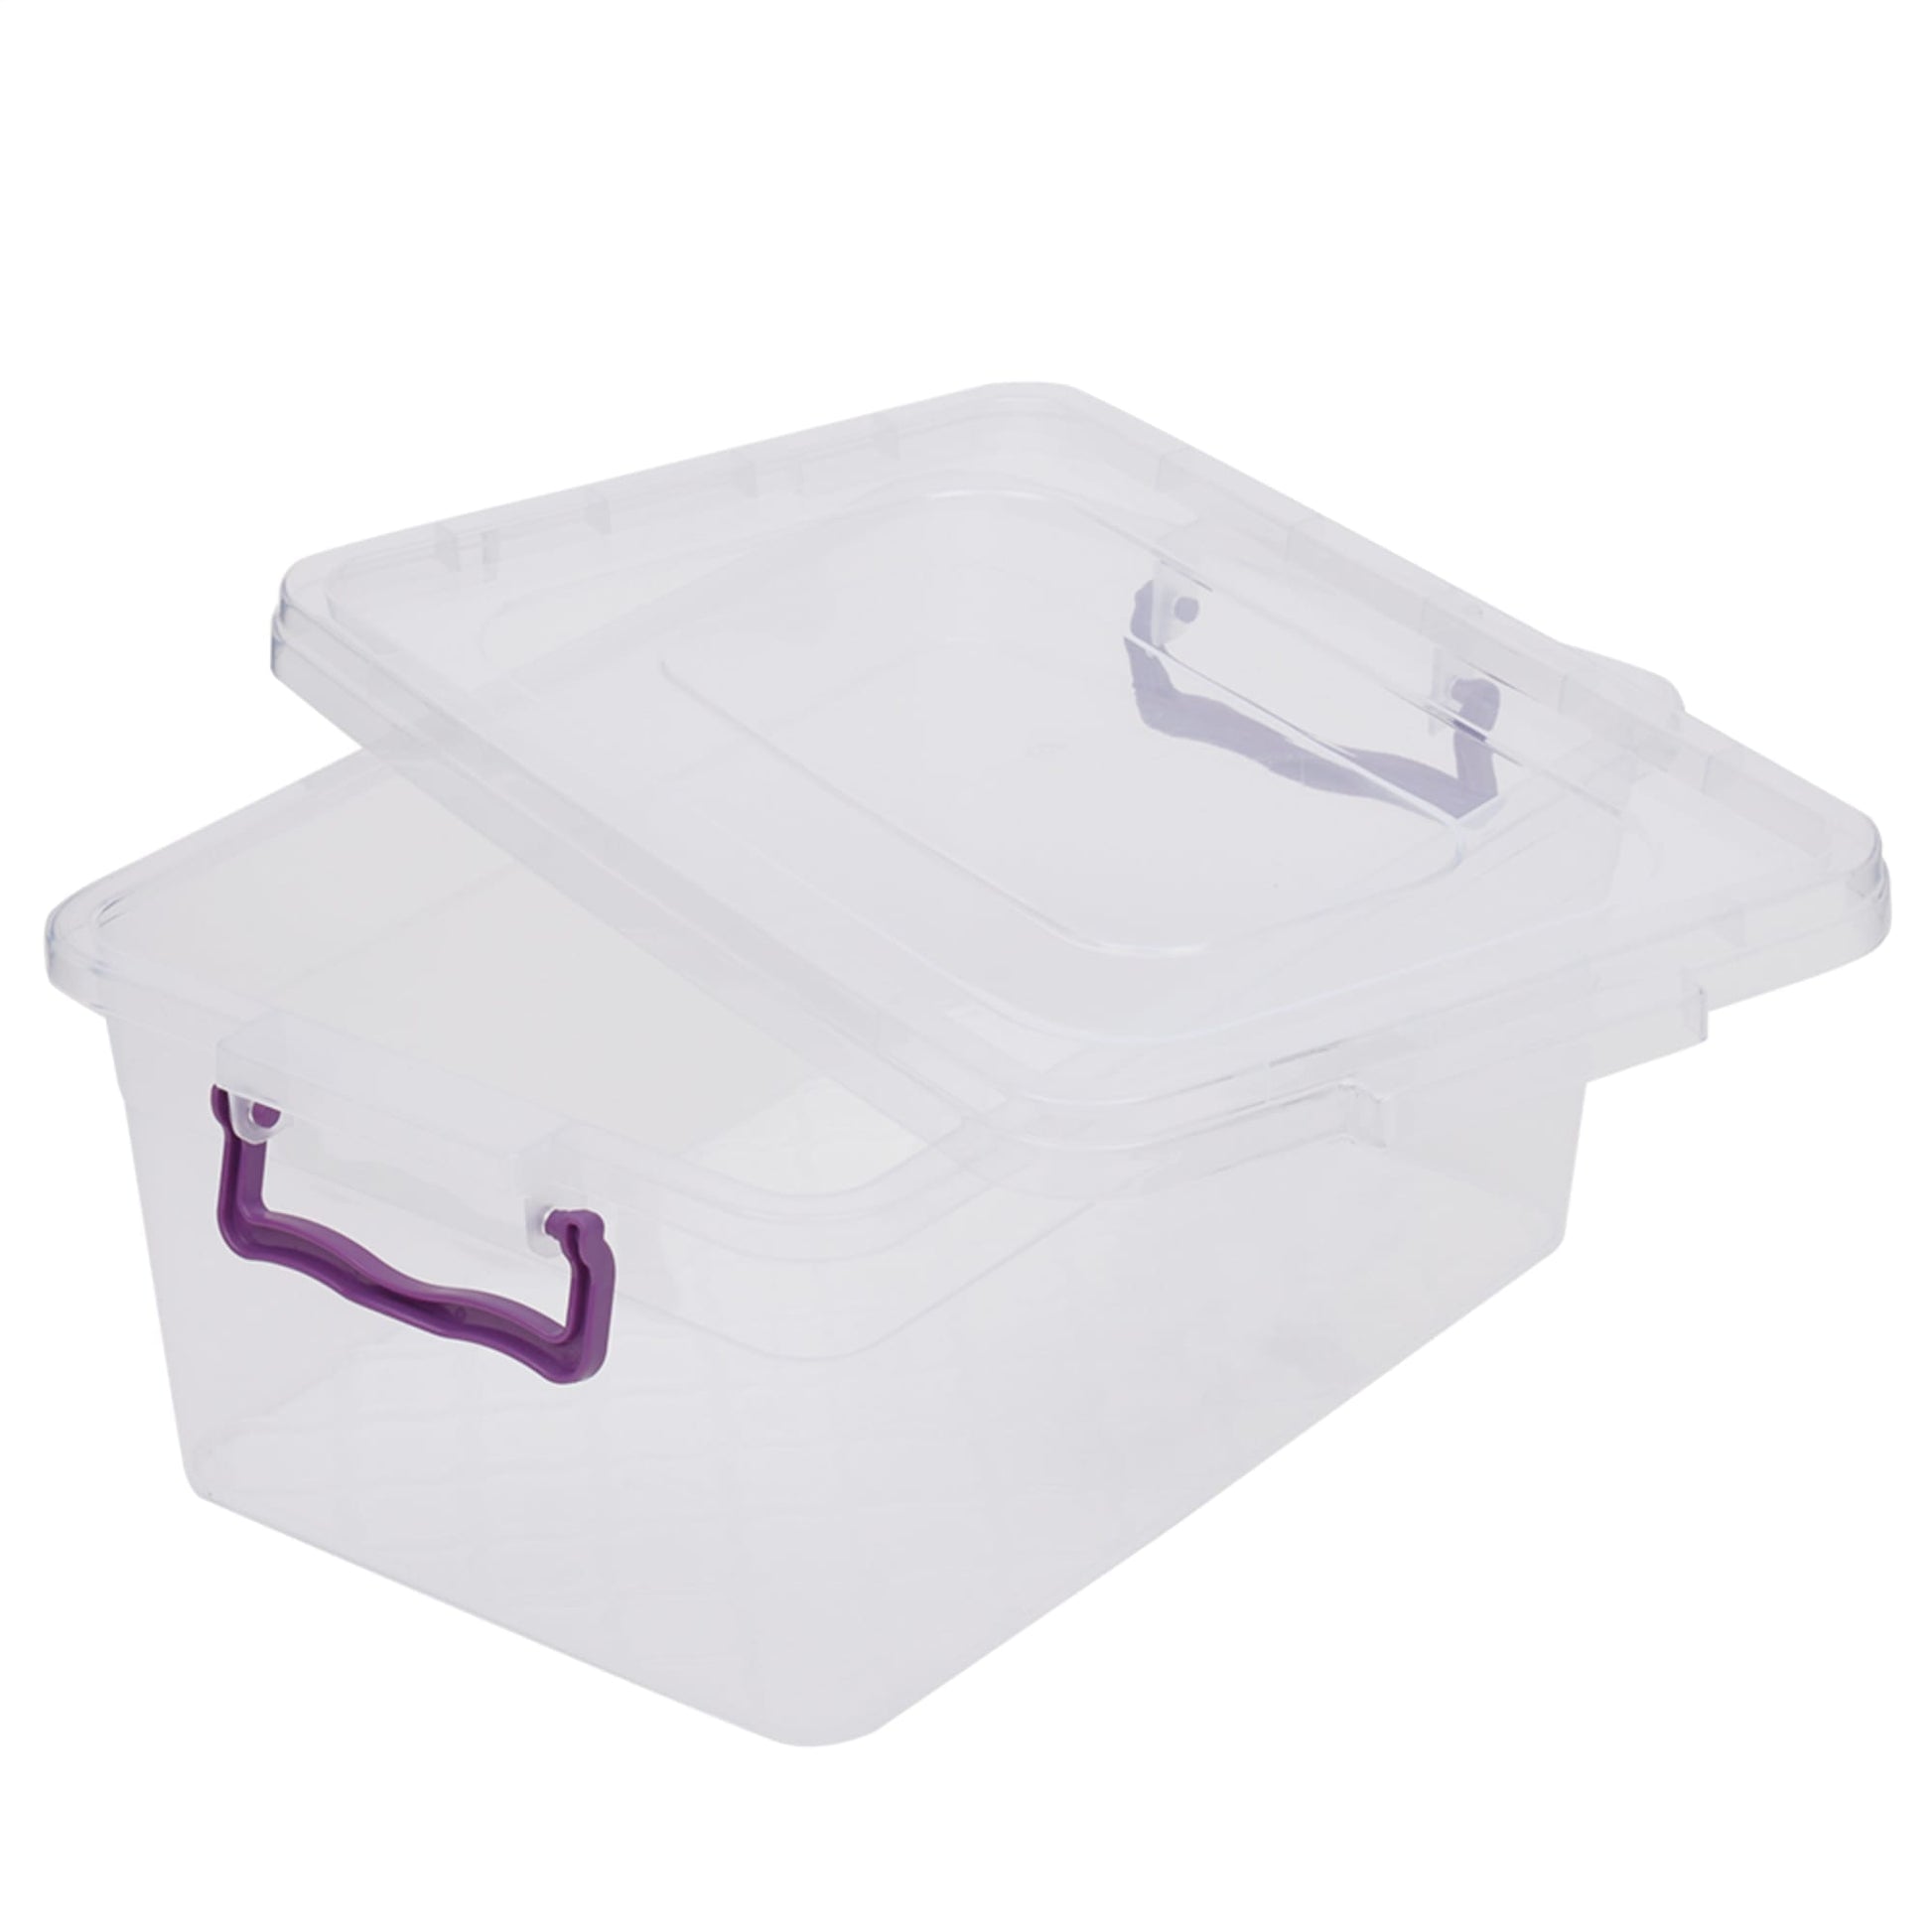 6 Wholesale Home Basics 4.25 Liter Storage Box With Handle, Clear - at 